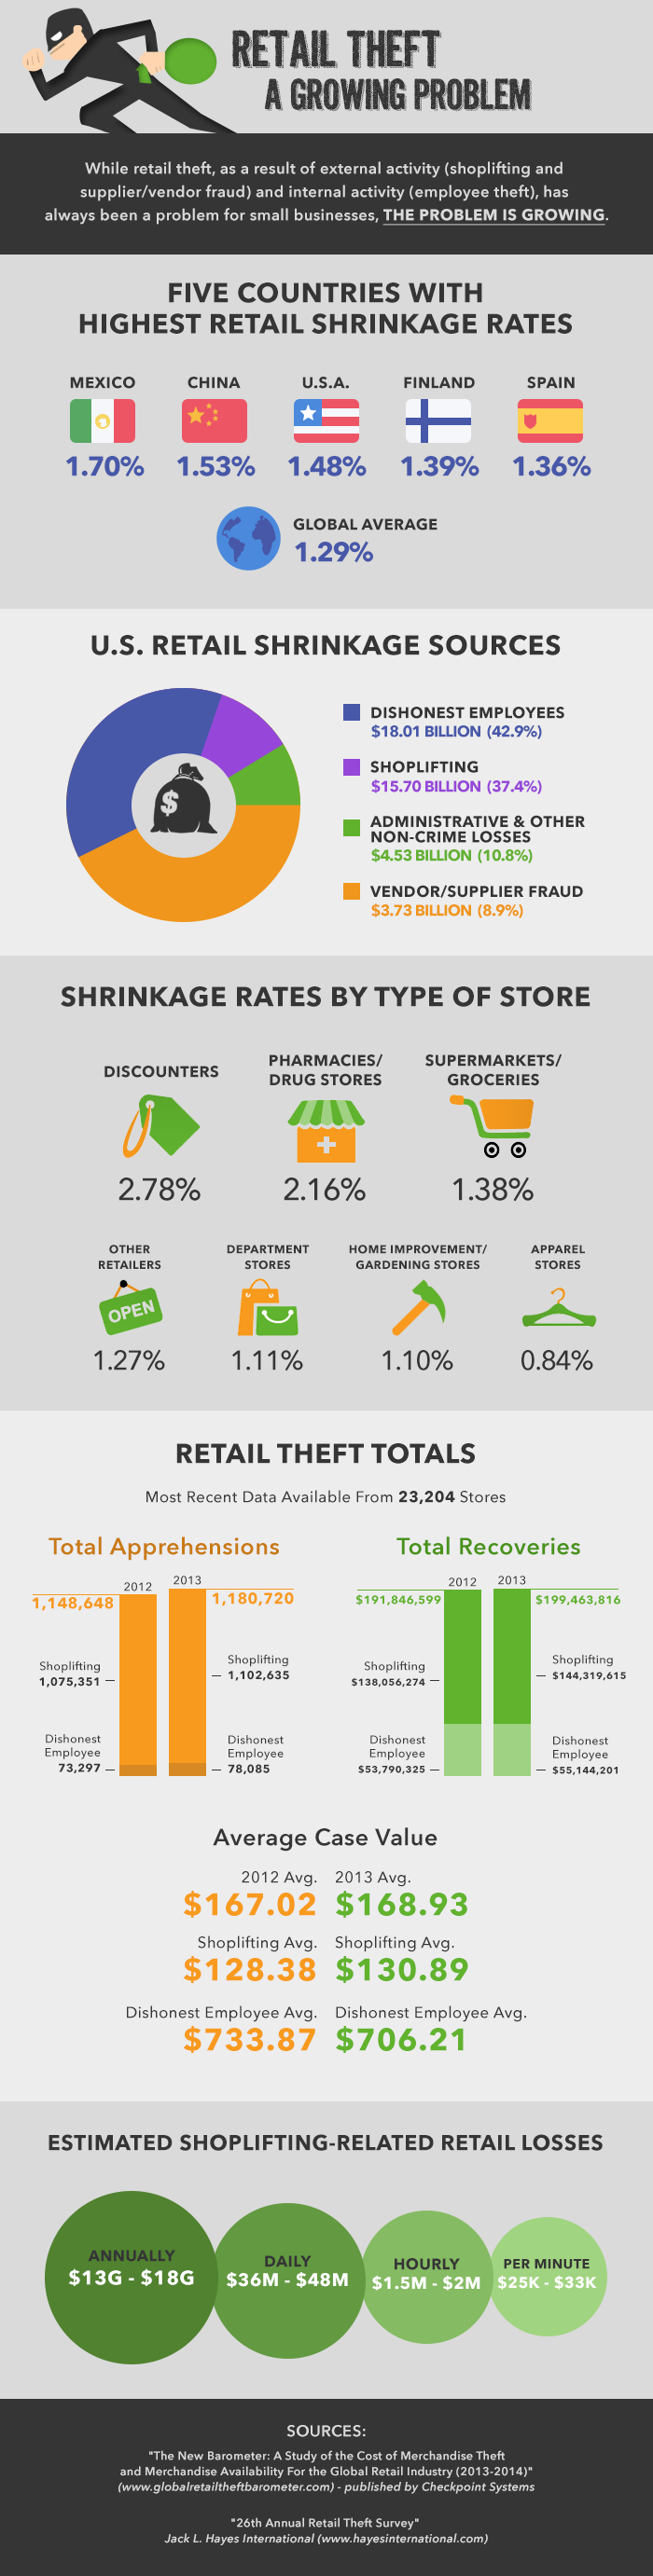 Infographic: retail theft a growing problem for small business